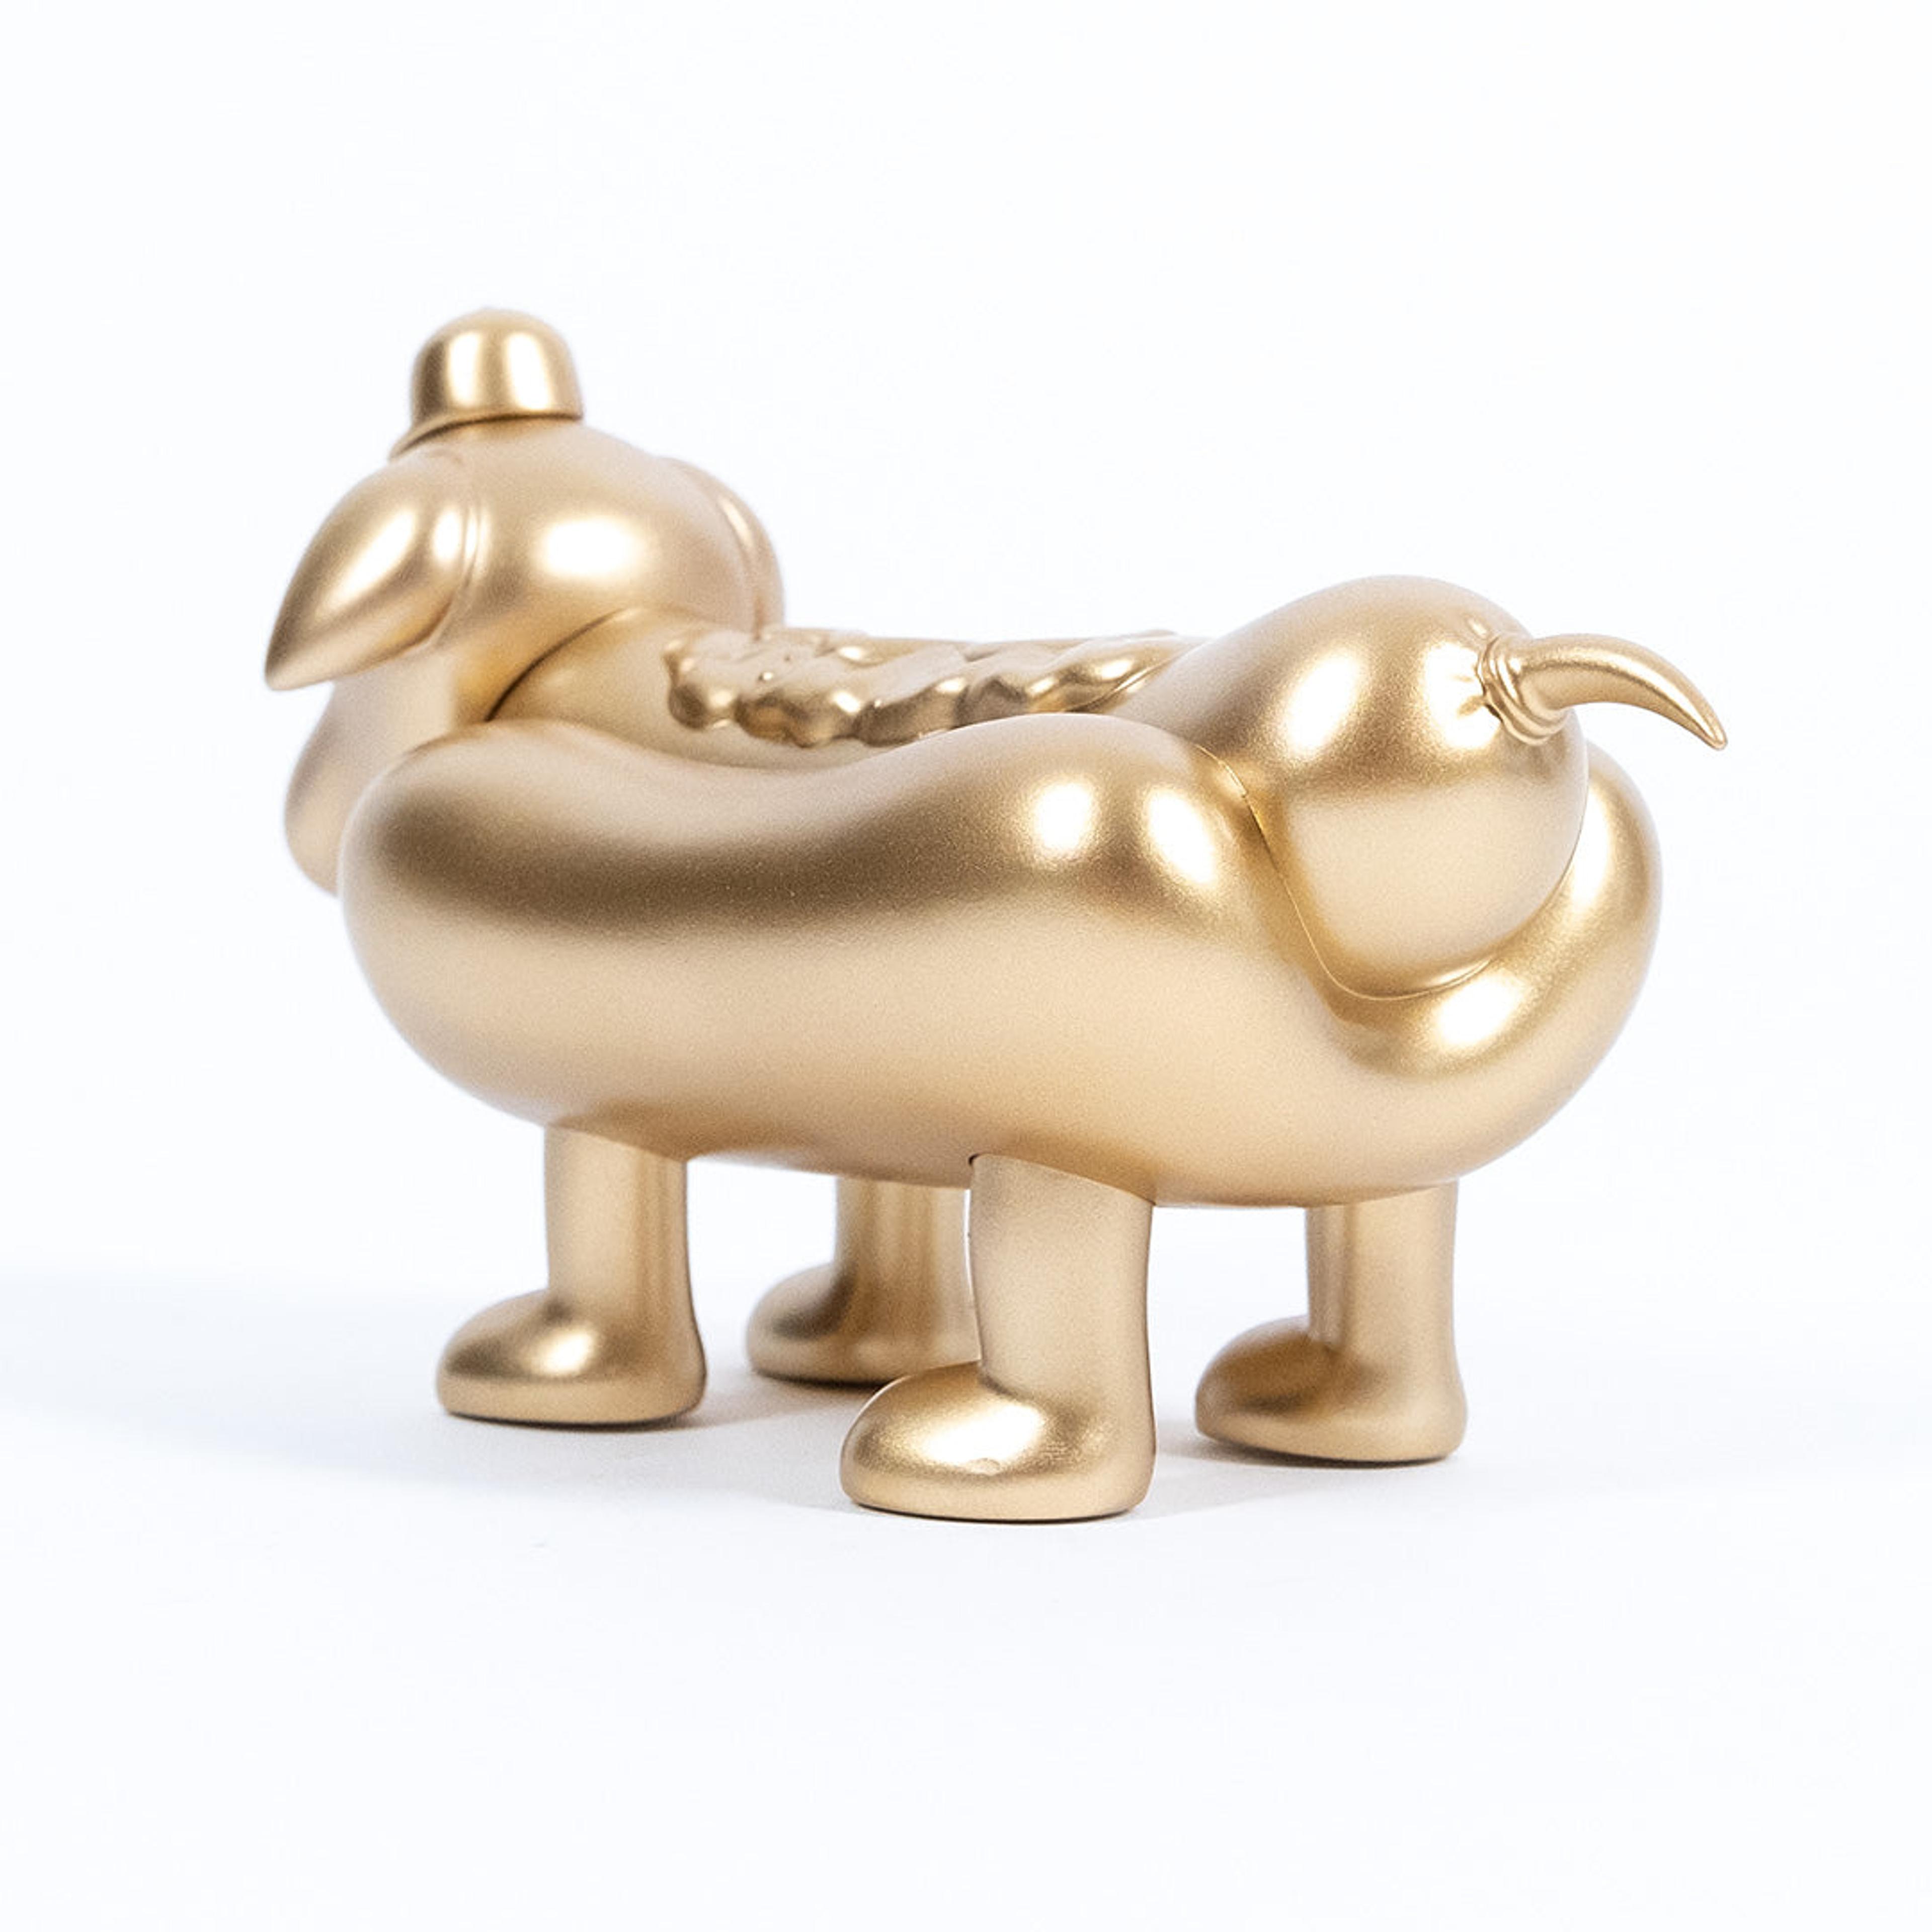 Alternate View 5 of Sheefy Coney Dog Sculpture - Gold